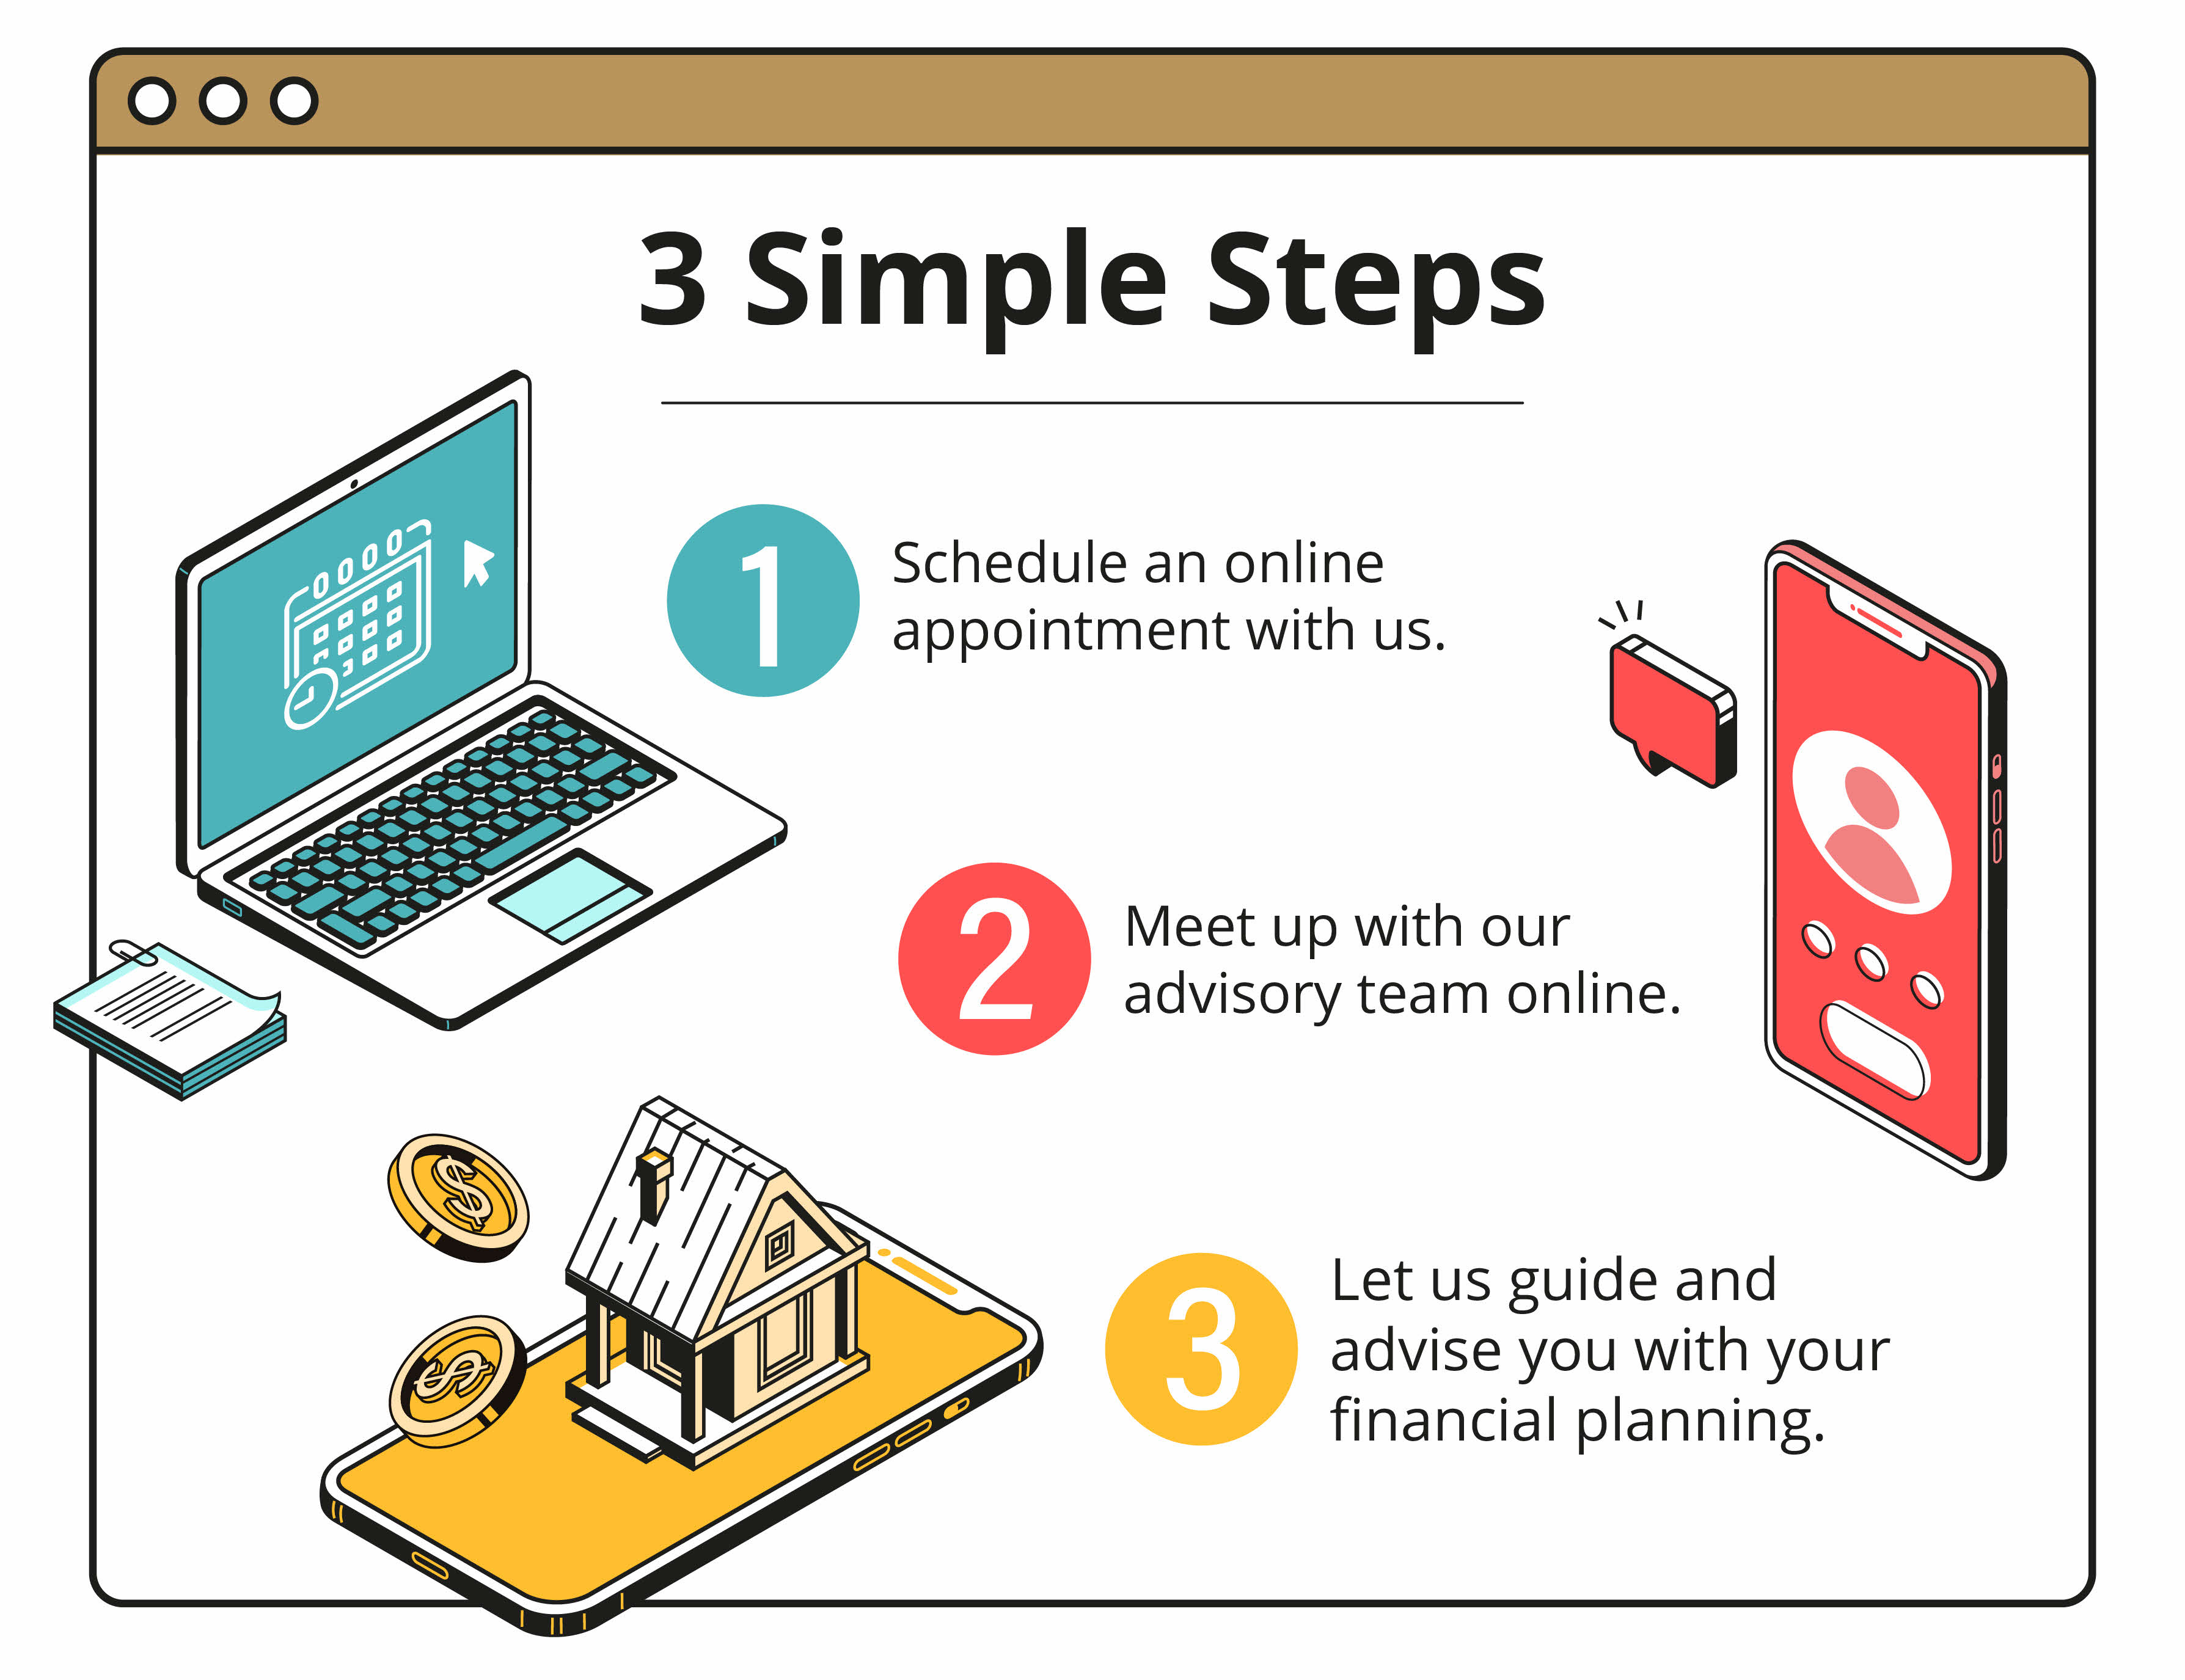 Get started in 3 simple steps